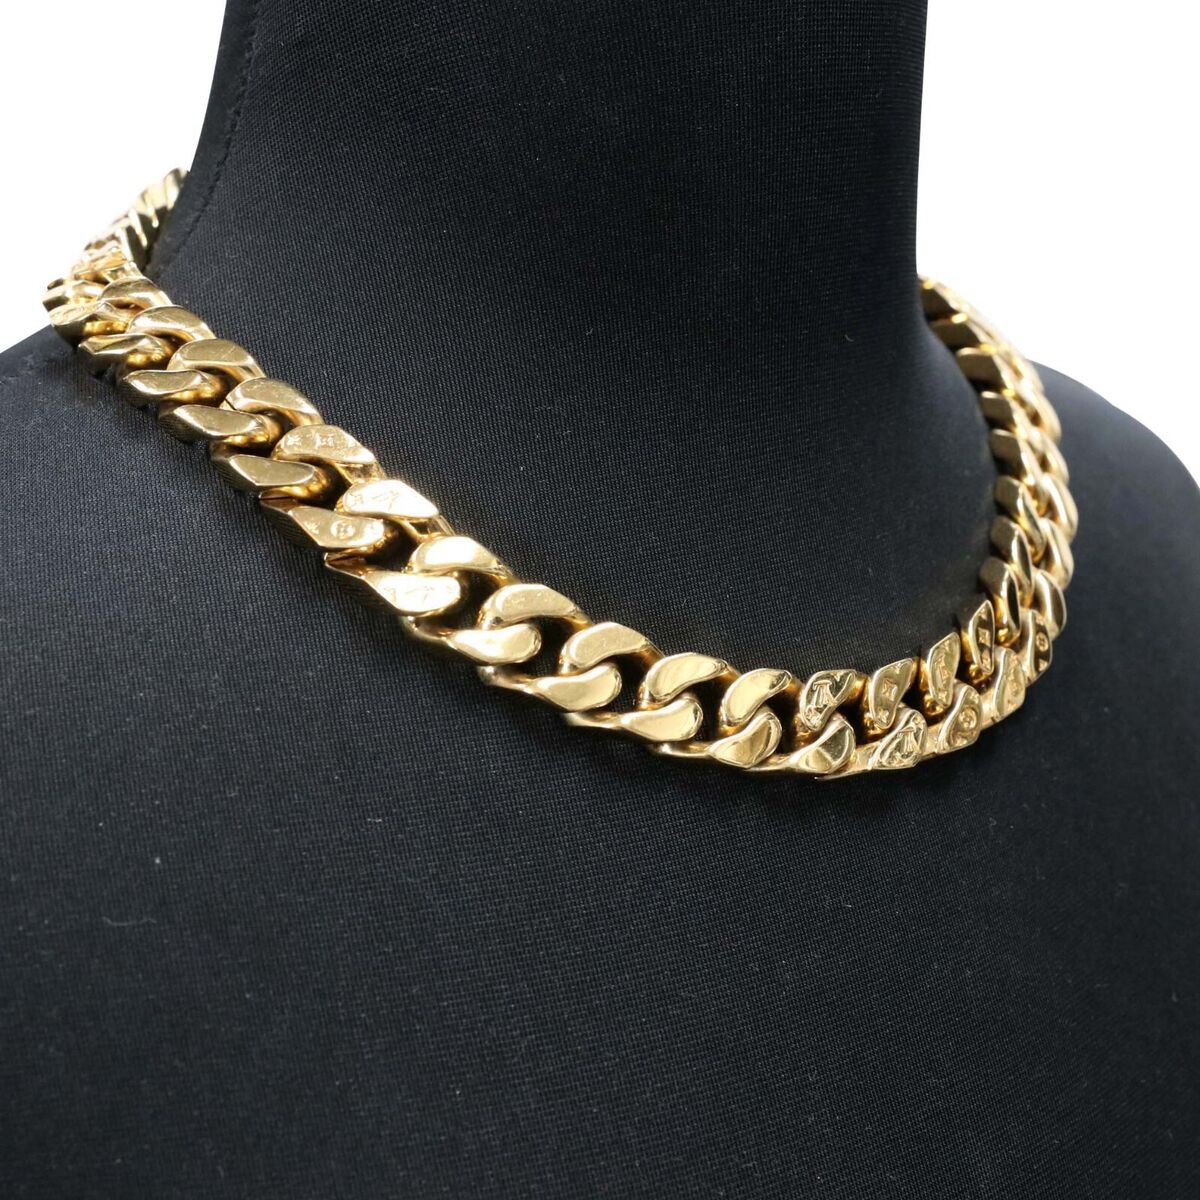 Louis Vuitton - Authenticated Long Necklace - Gold for Women, Good Condition